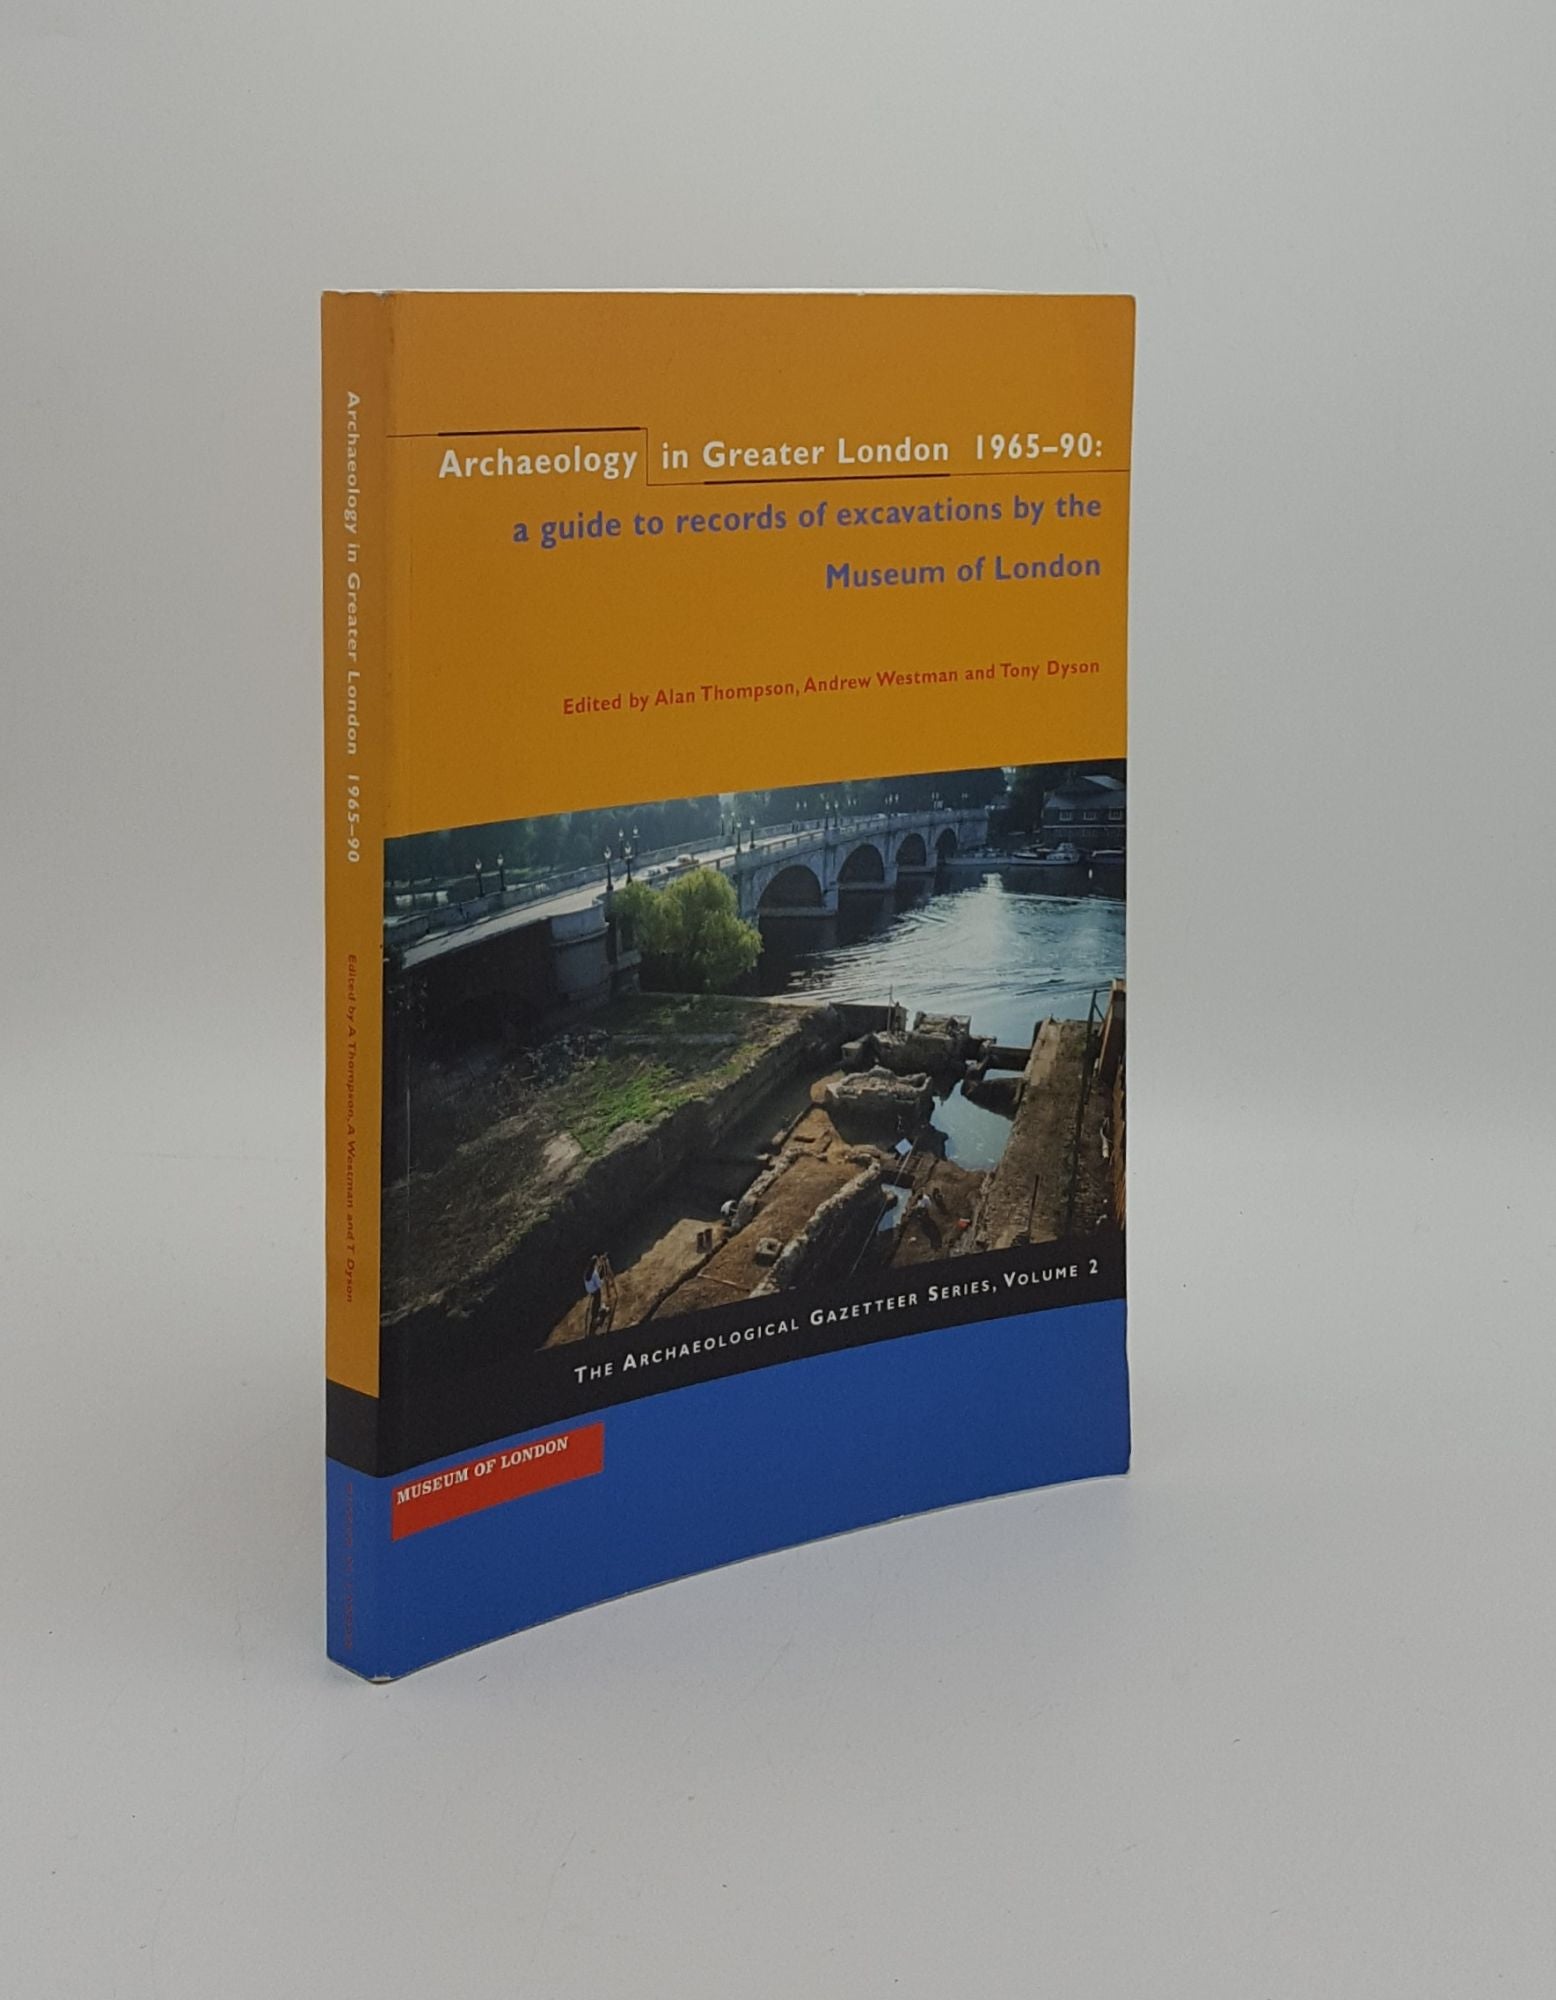 THOMPSON Alan, WESTMAN Andrew, DYSON Tony - Archaeology in Greater London 1965-90 a Guide to Records of Excavations by the Musem of London